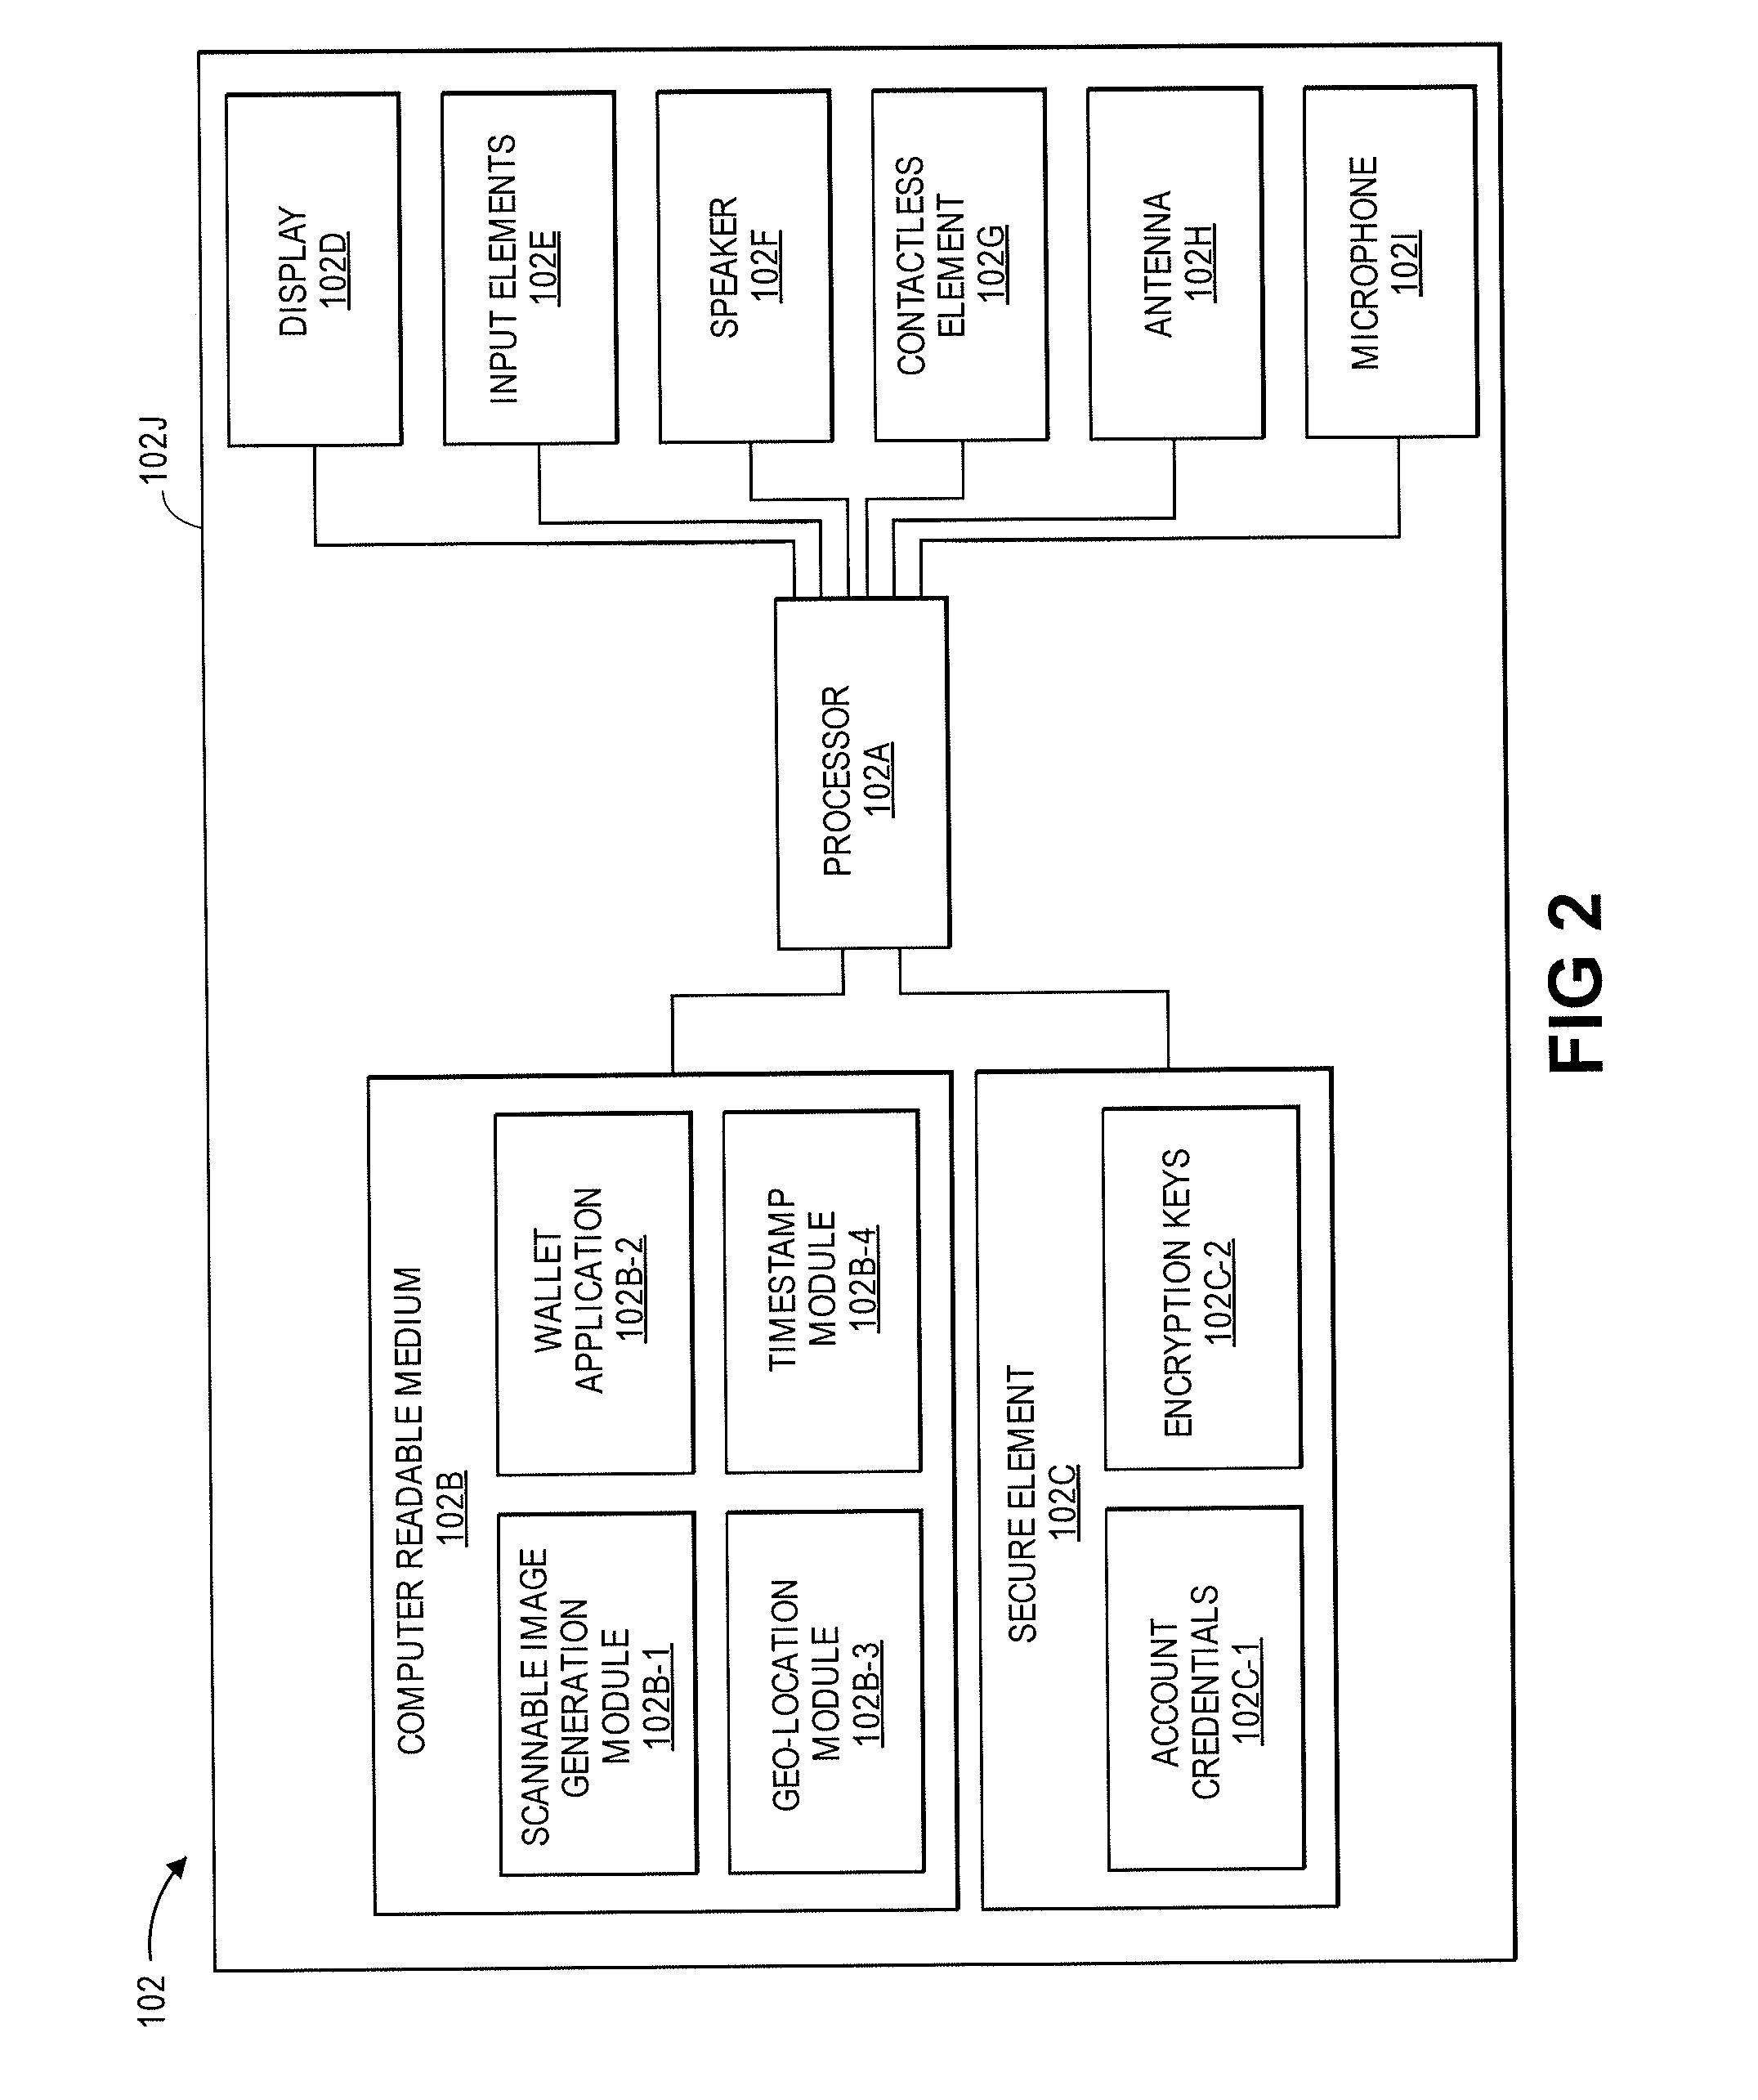 Mobile device with scannable image including dynamic data